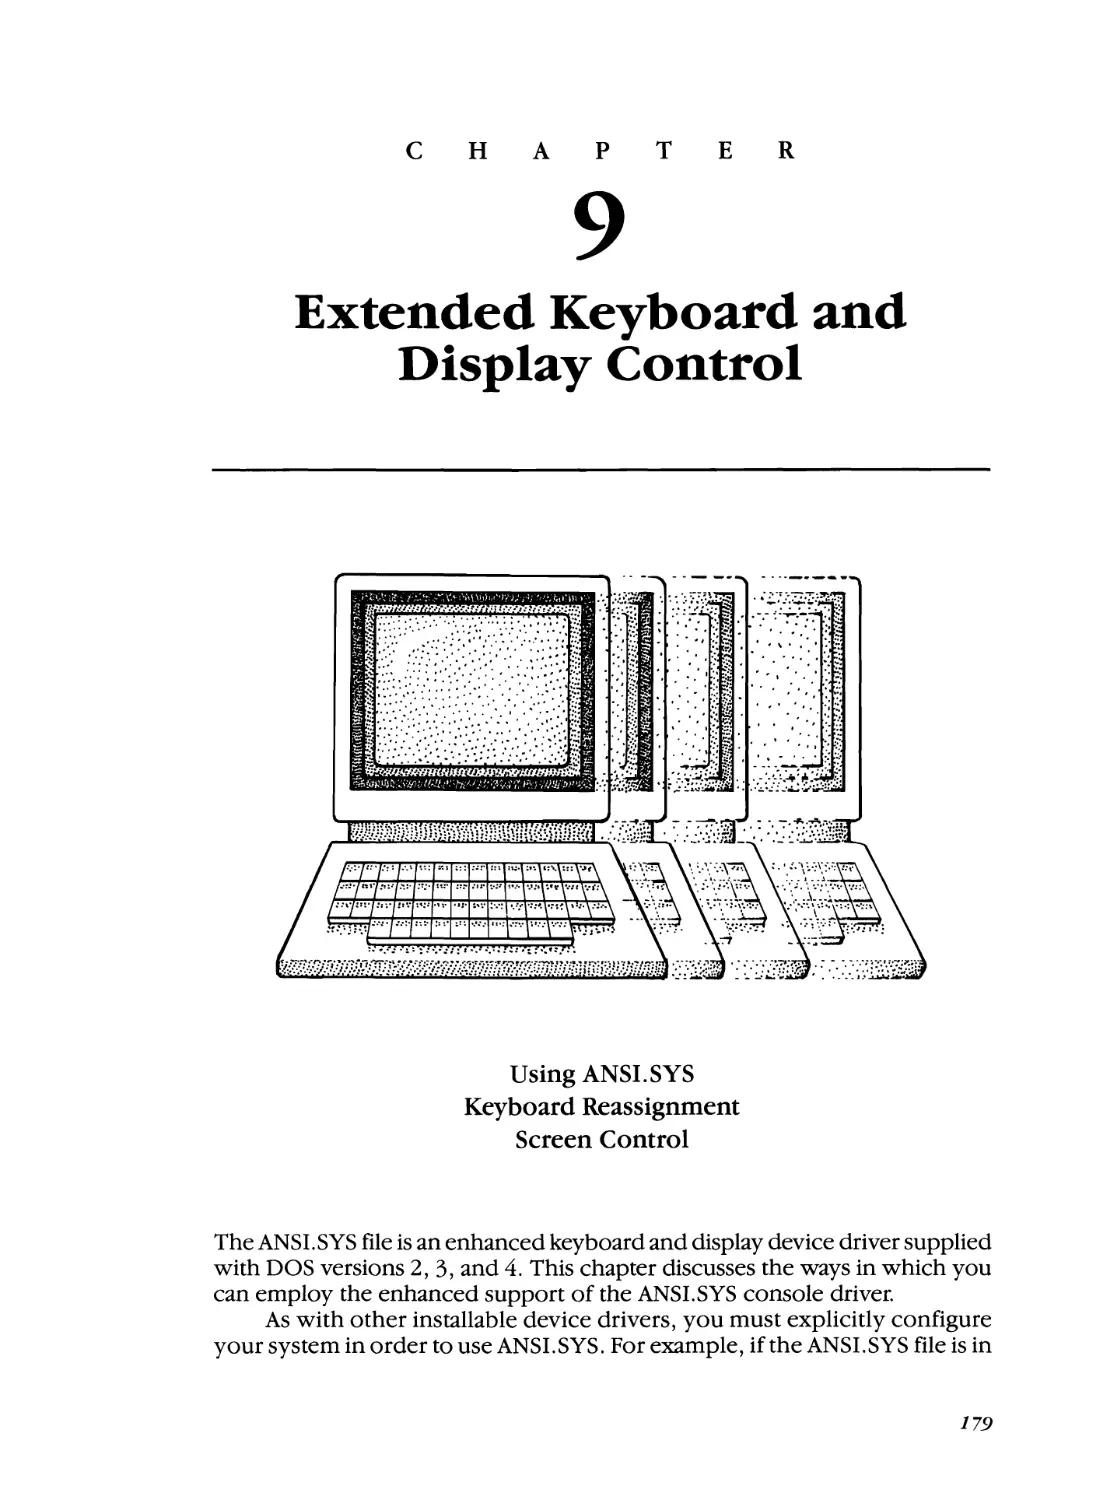 Chapter 9 - Extended Keyboard and Display Control